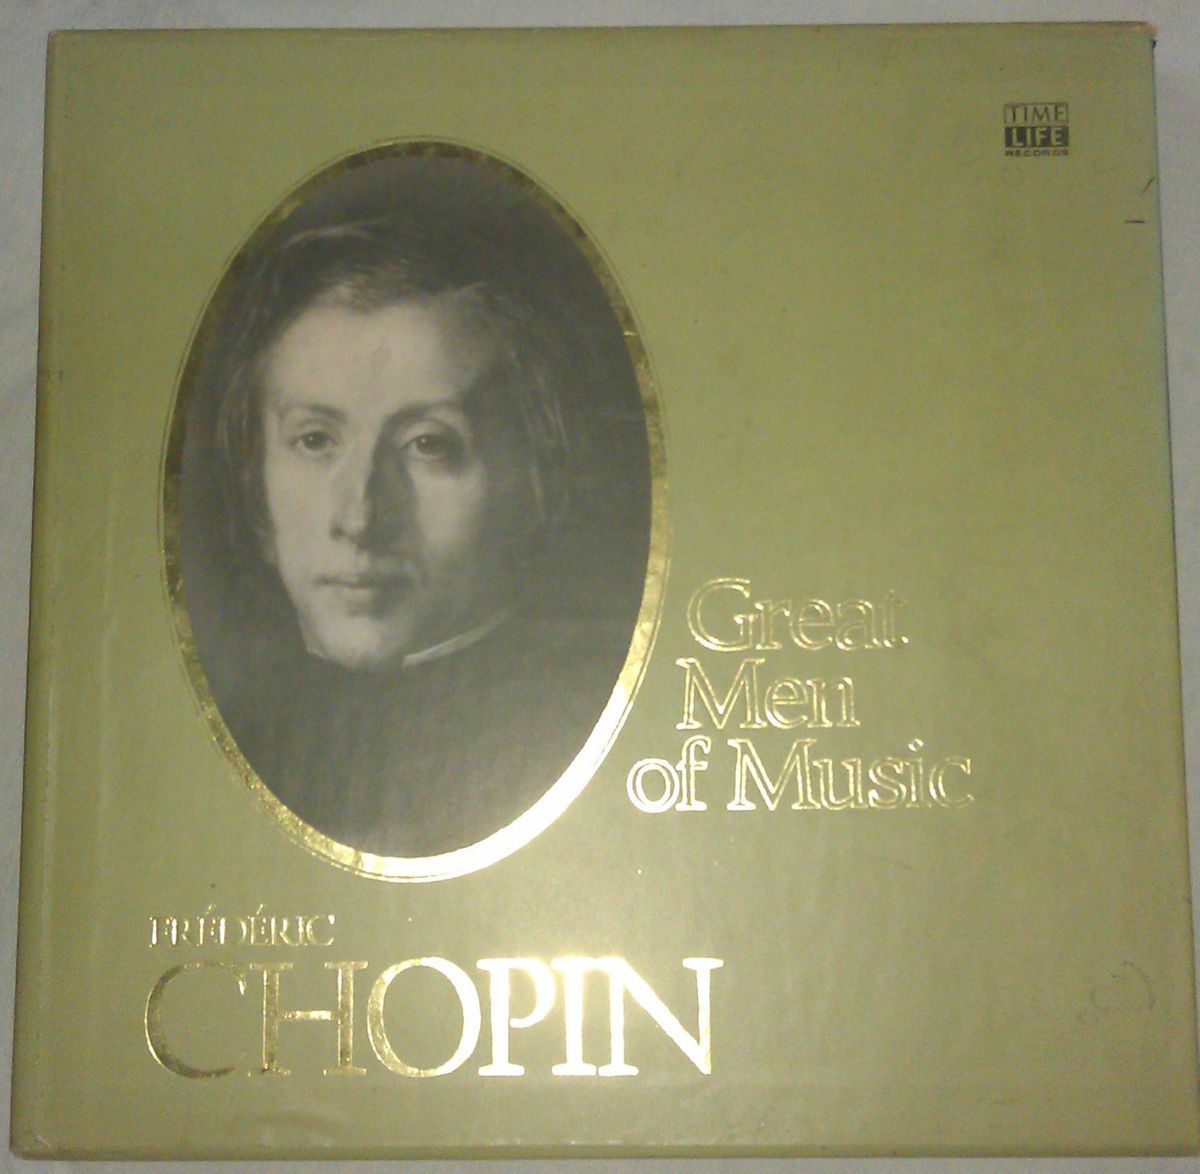 Time Life records Great Men Of Music Frederic Chopin 4LP Box